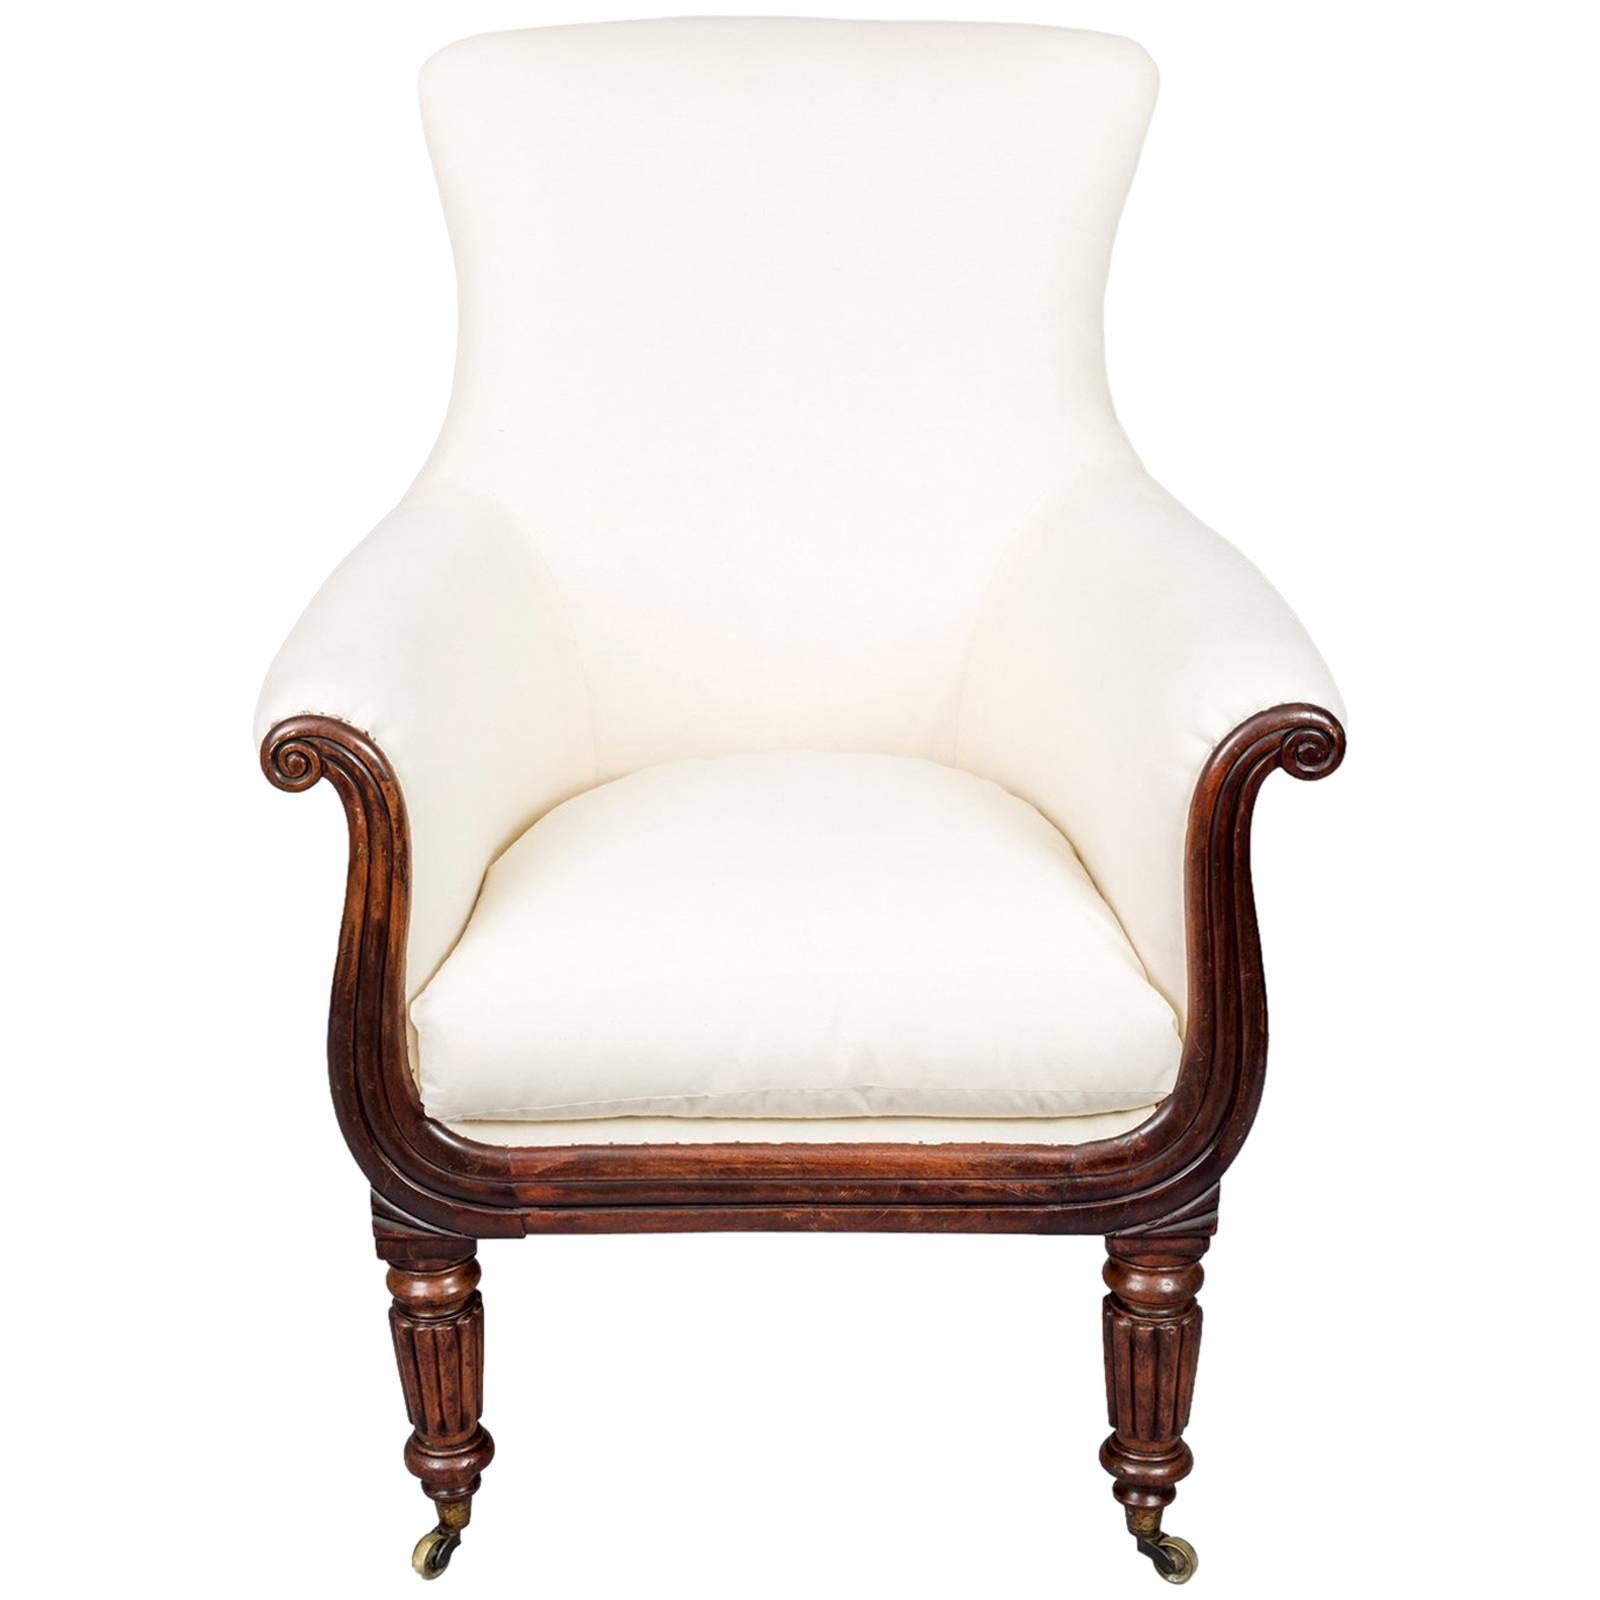 Regency Mahogany Lyre-Shaped Armchair For Sale